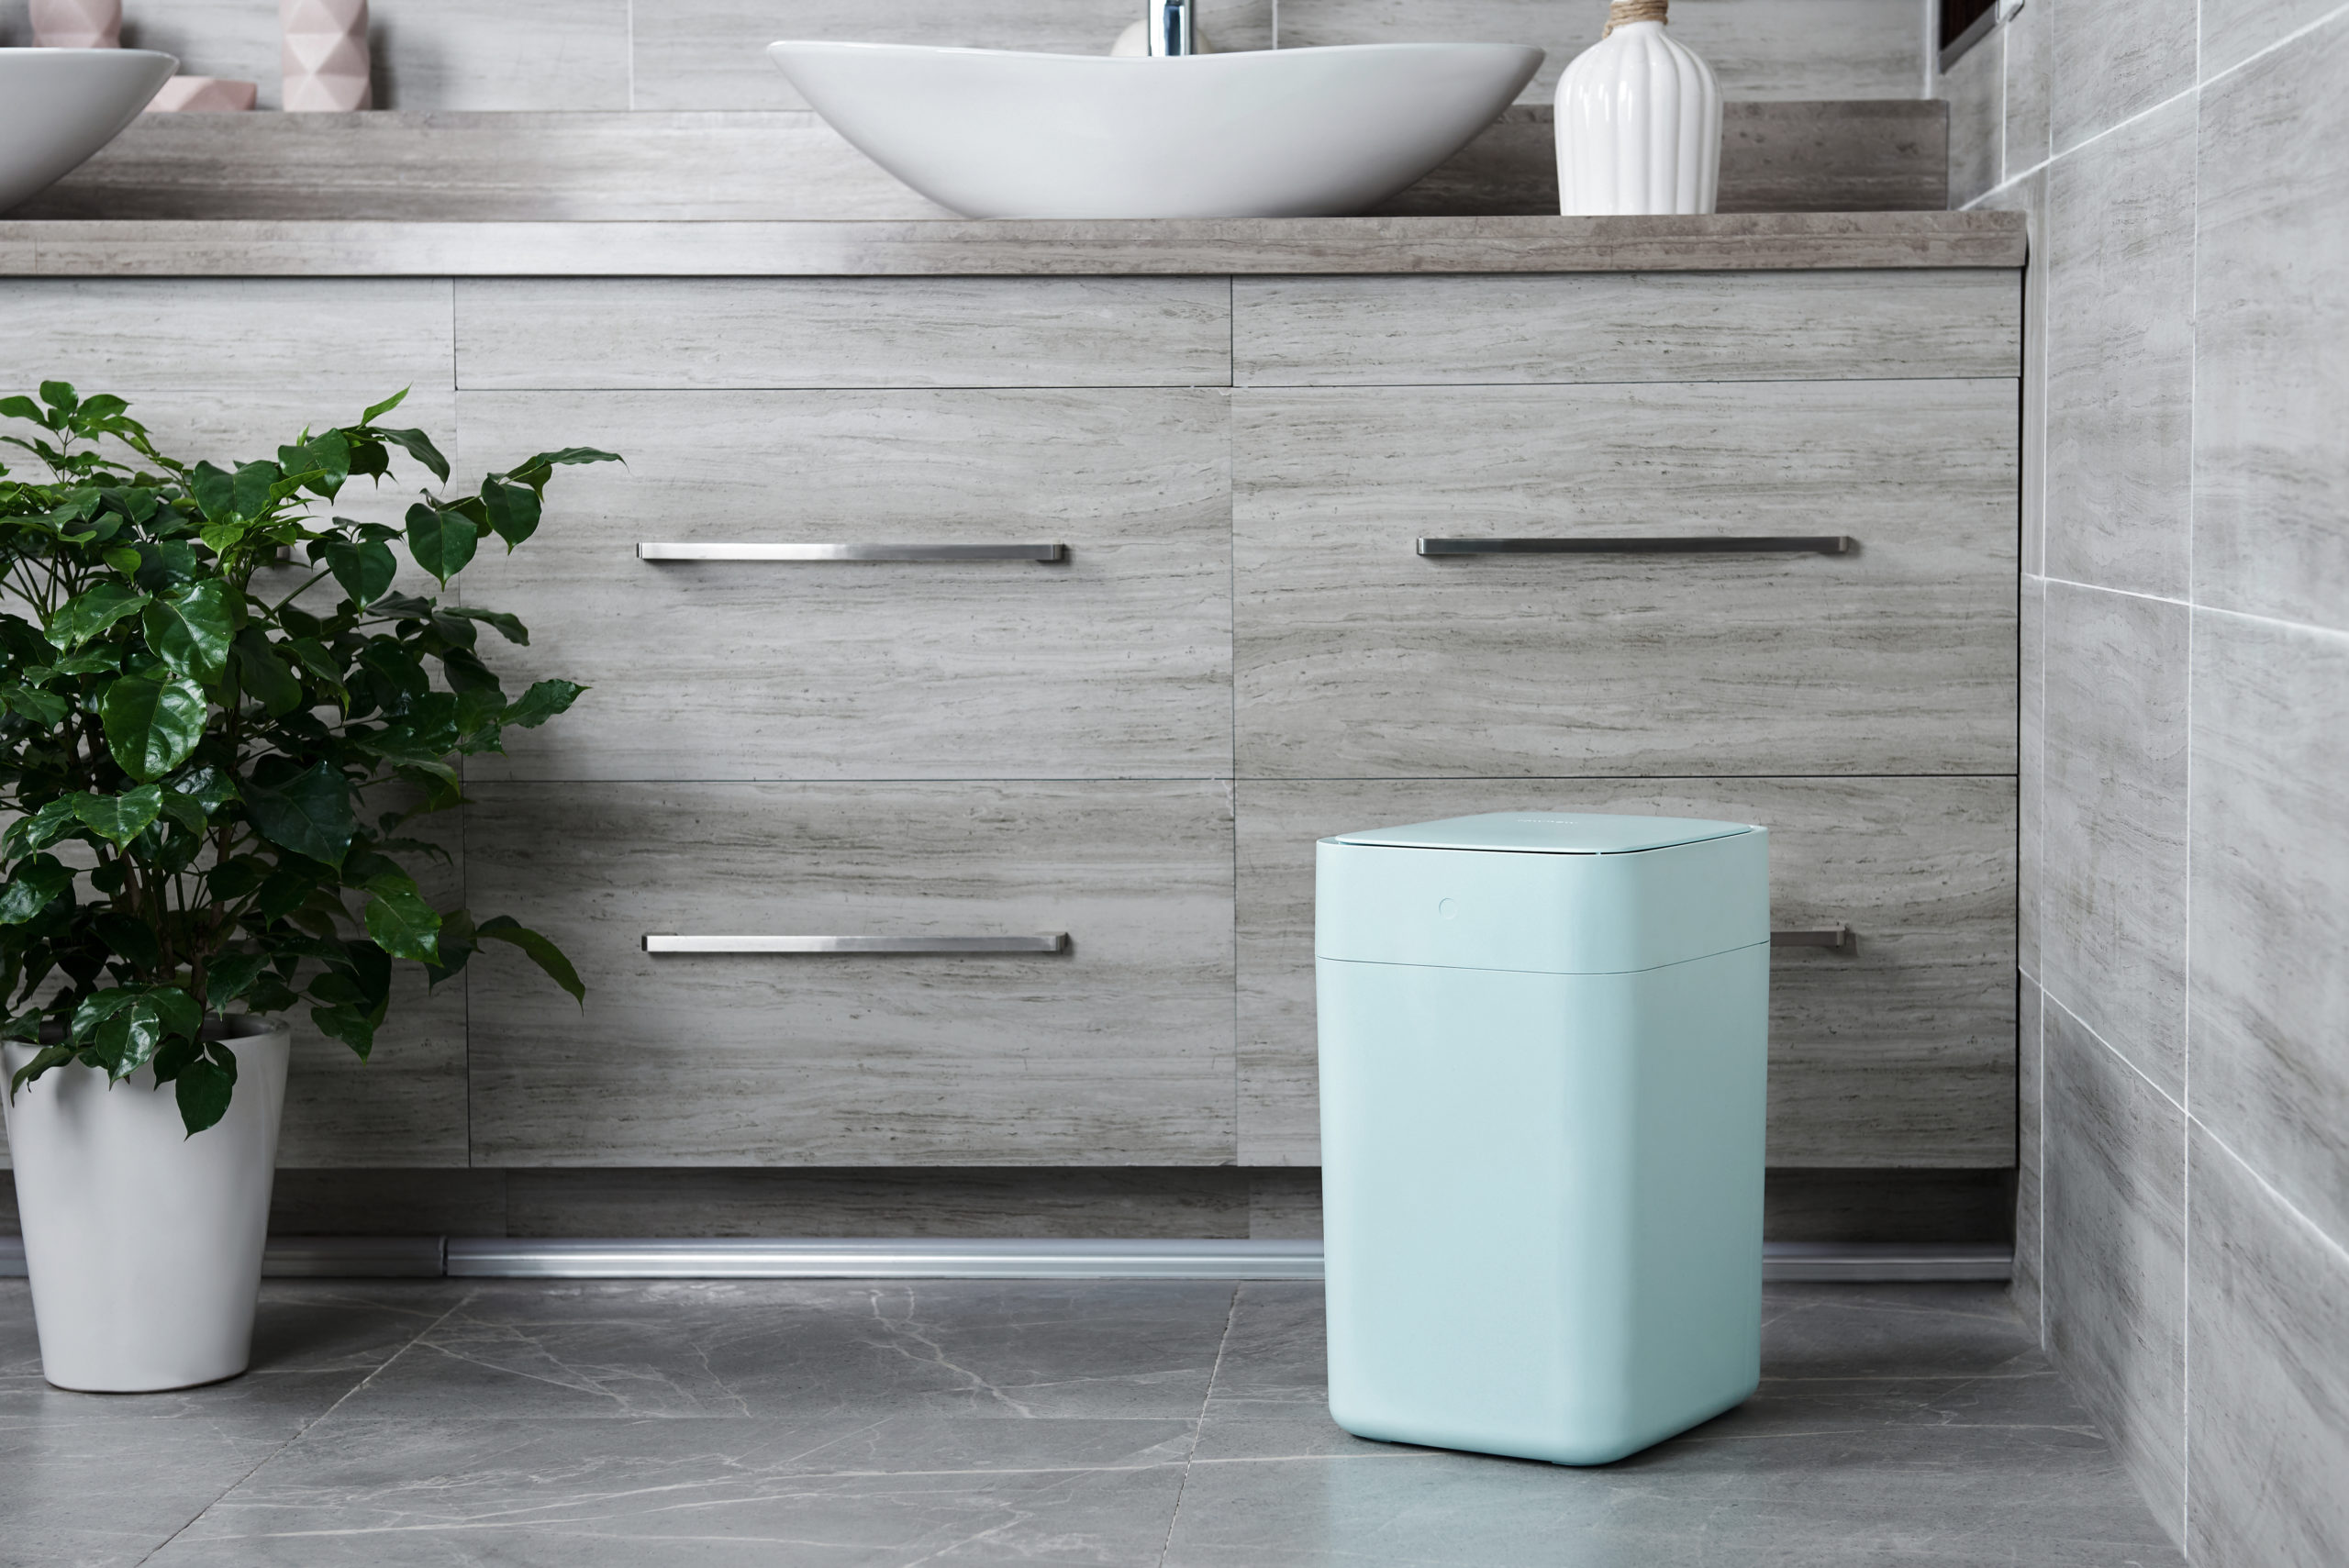 https://www.sunset.com/wp-content/uploads/townew-smart-trash-can-kitchen-pr-0120-scaled.jpg